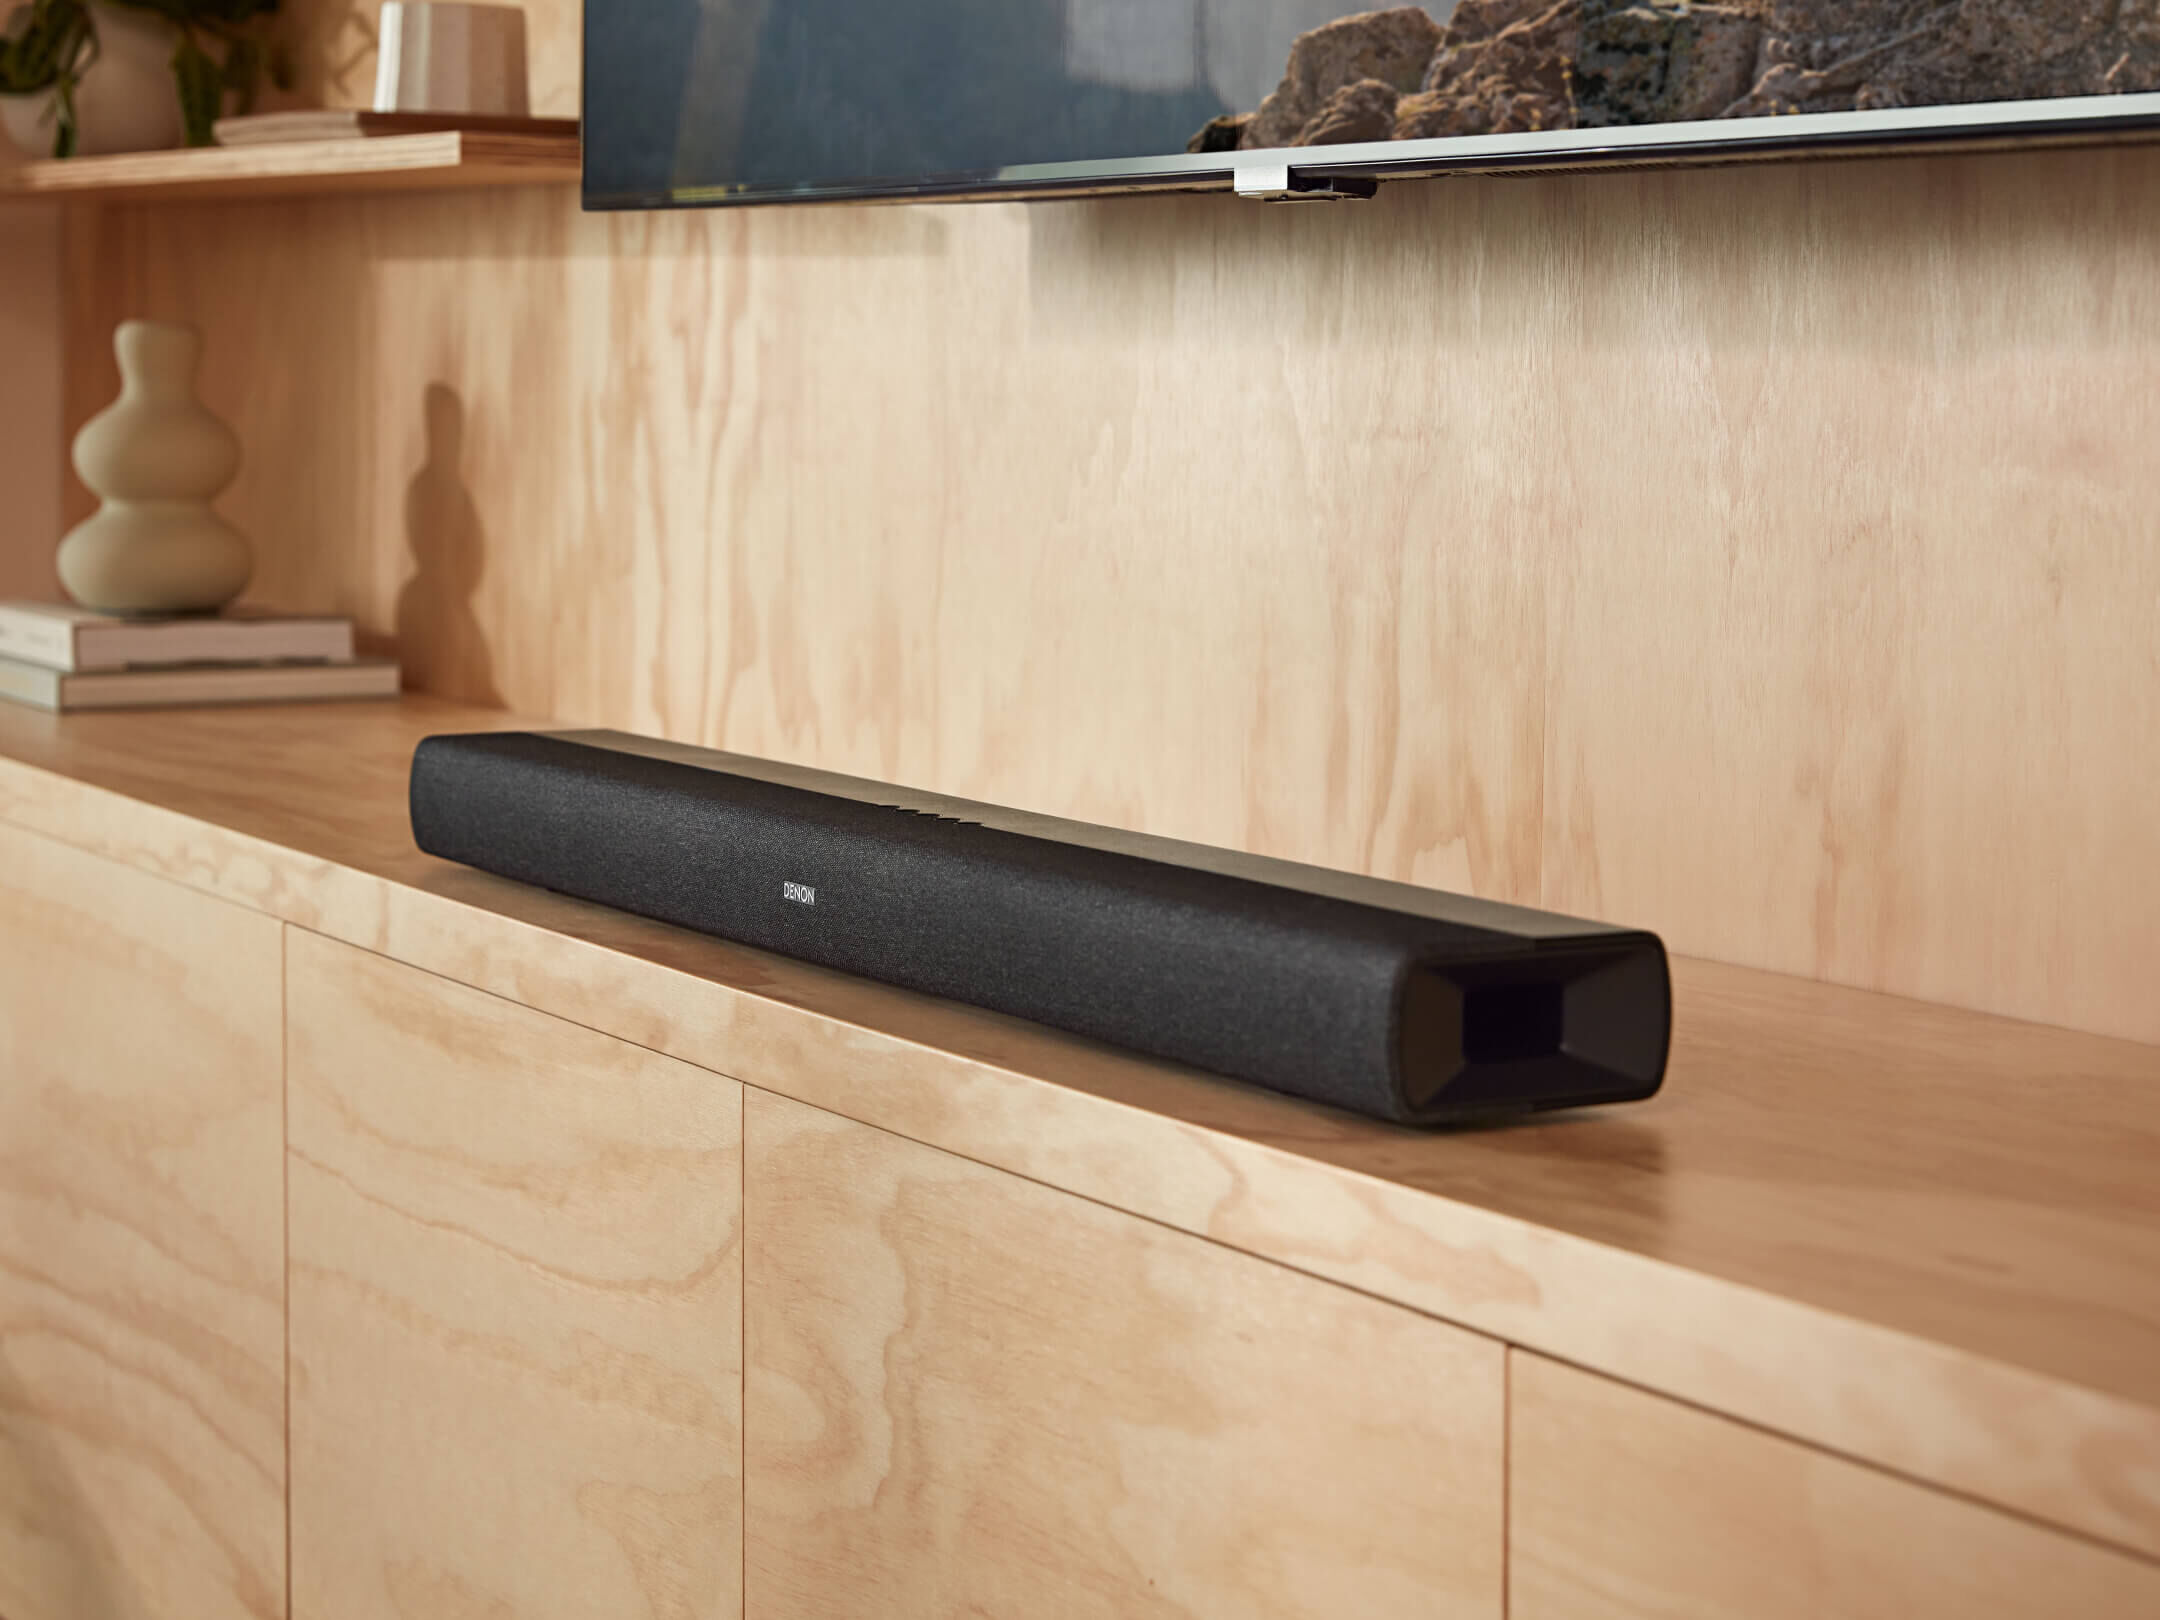 DHT-S217 - Compact Sound Bar with Dolby Atmos | Denon - US